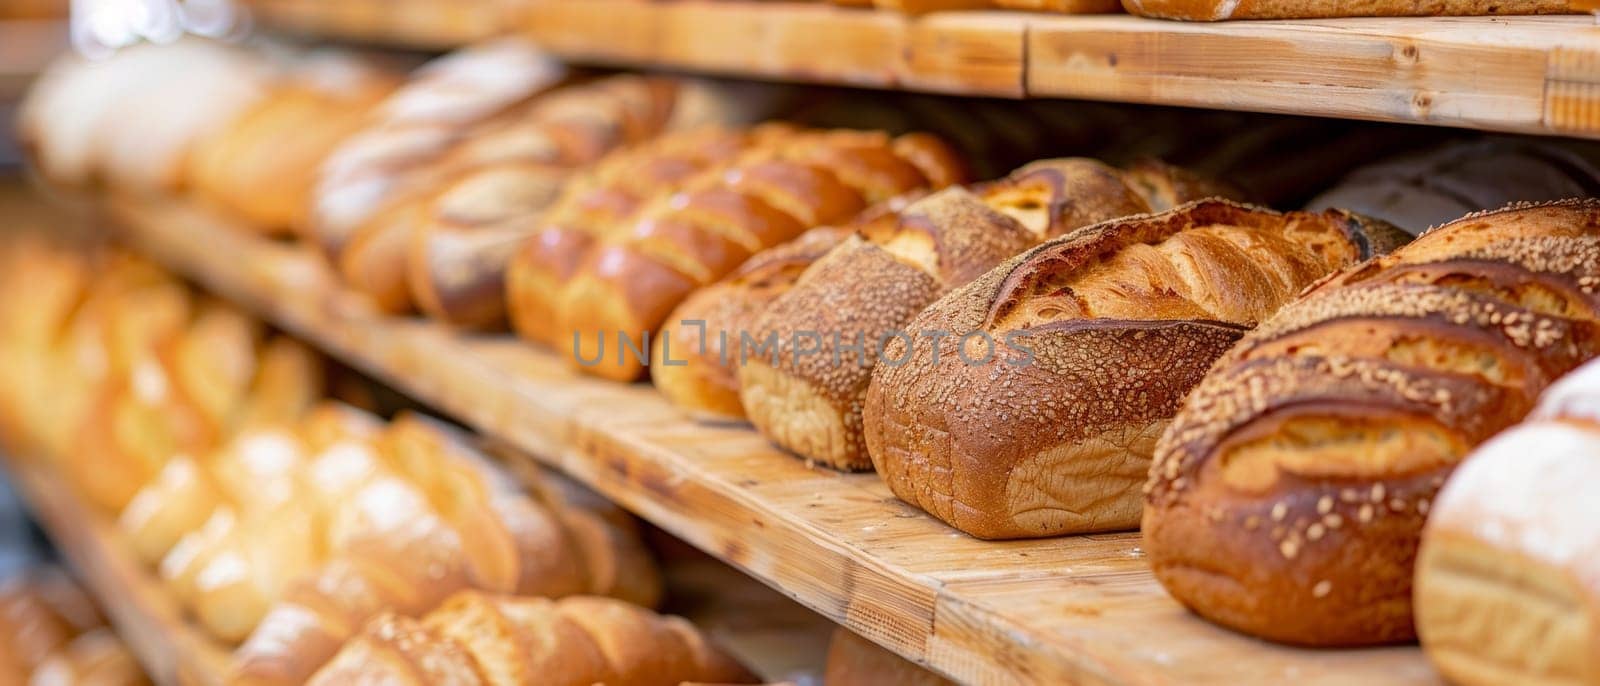 Close-up of a gourmet bread collection on wooden bakery shelves, featuring a variety of crusty loaves